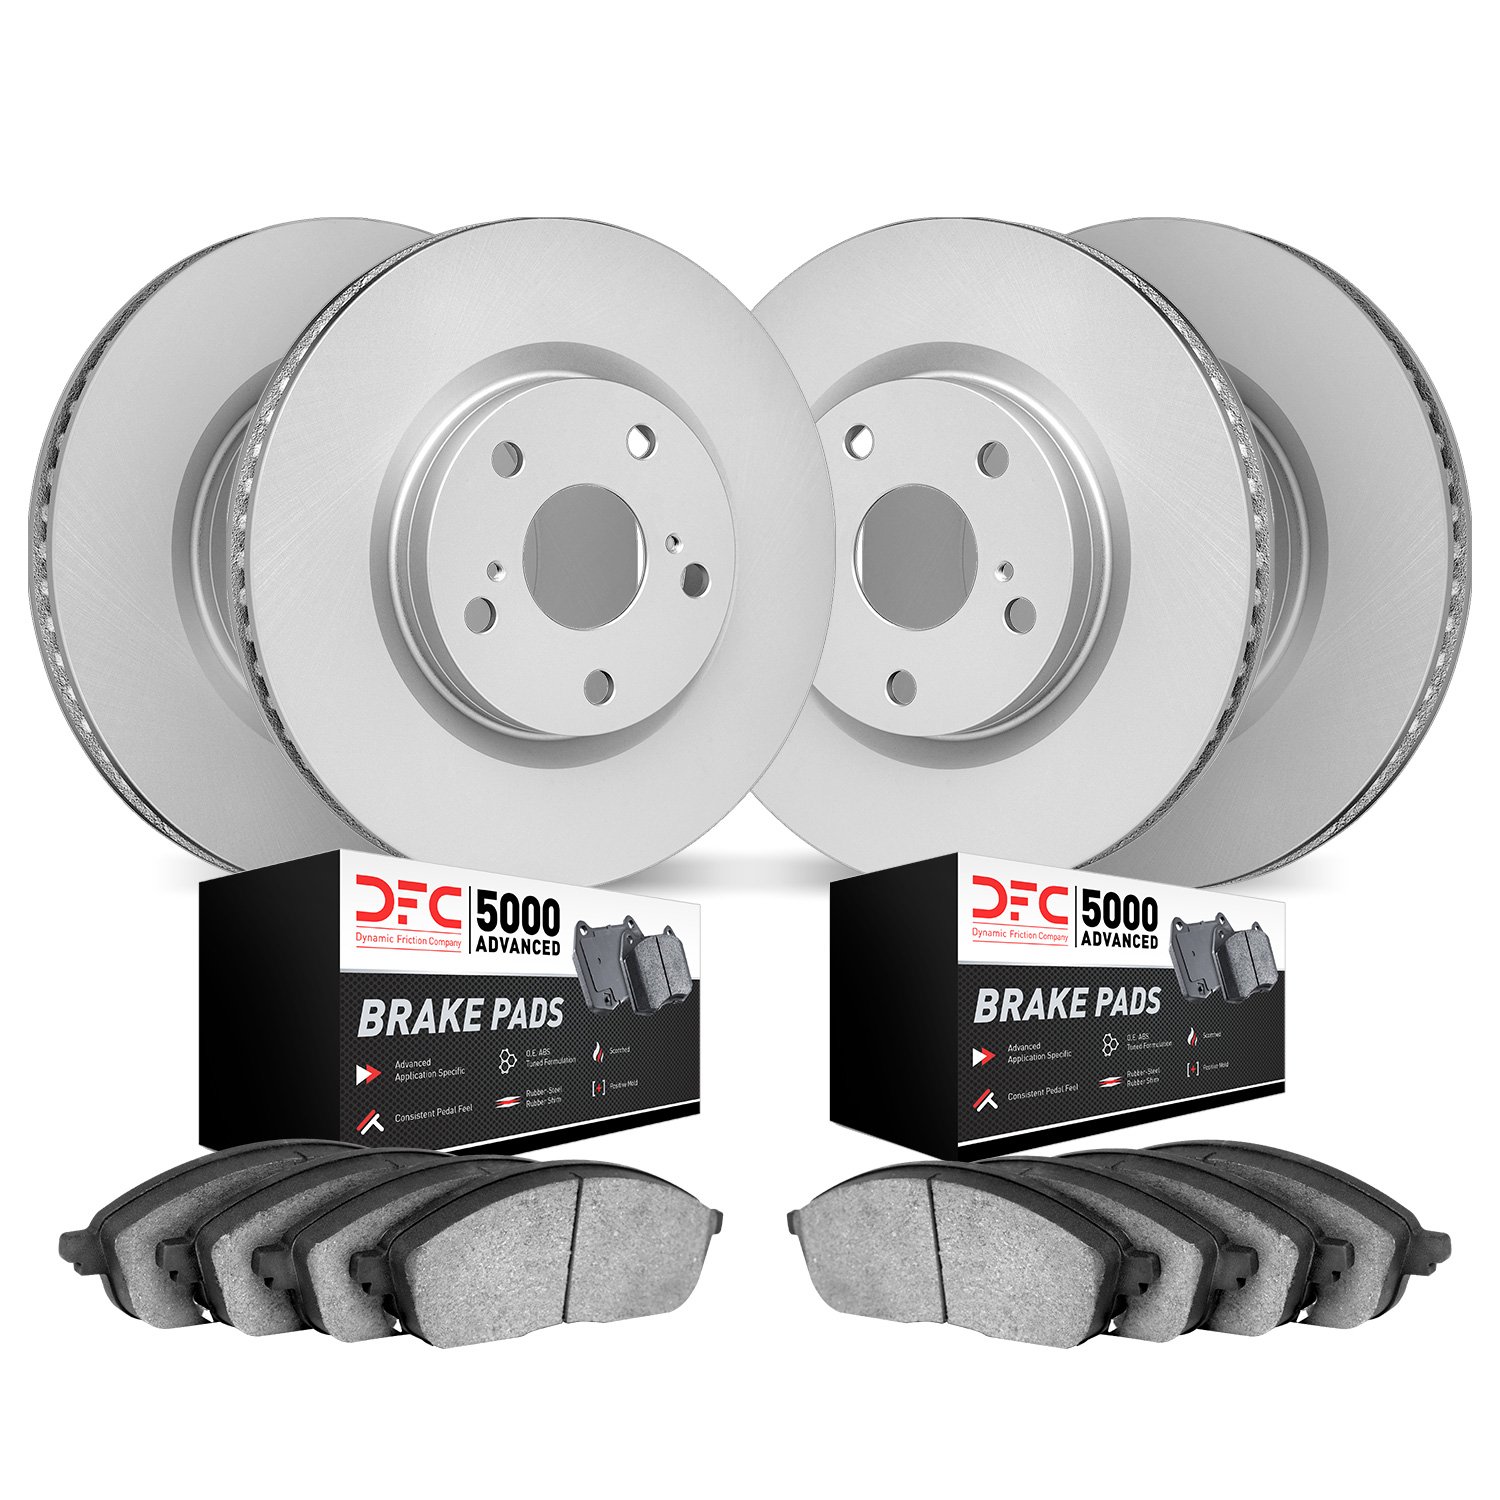 4504-46040 Geospec Brake Rotors w/5000 Advanced Brake Pads Kit, 2003-2007 GM, Position: Front and Rear